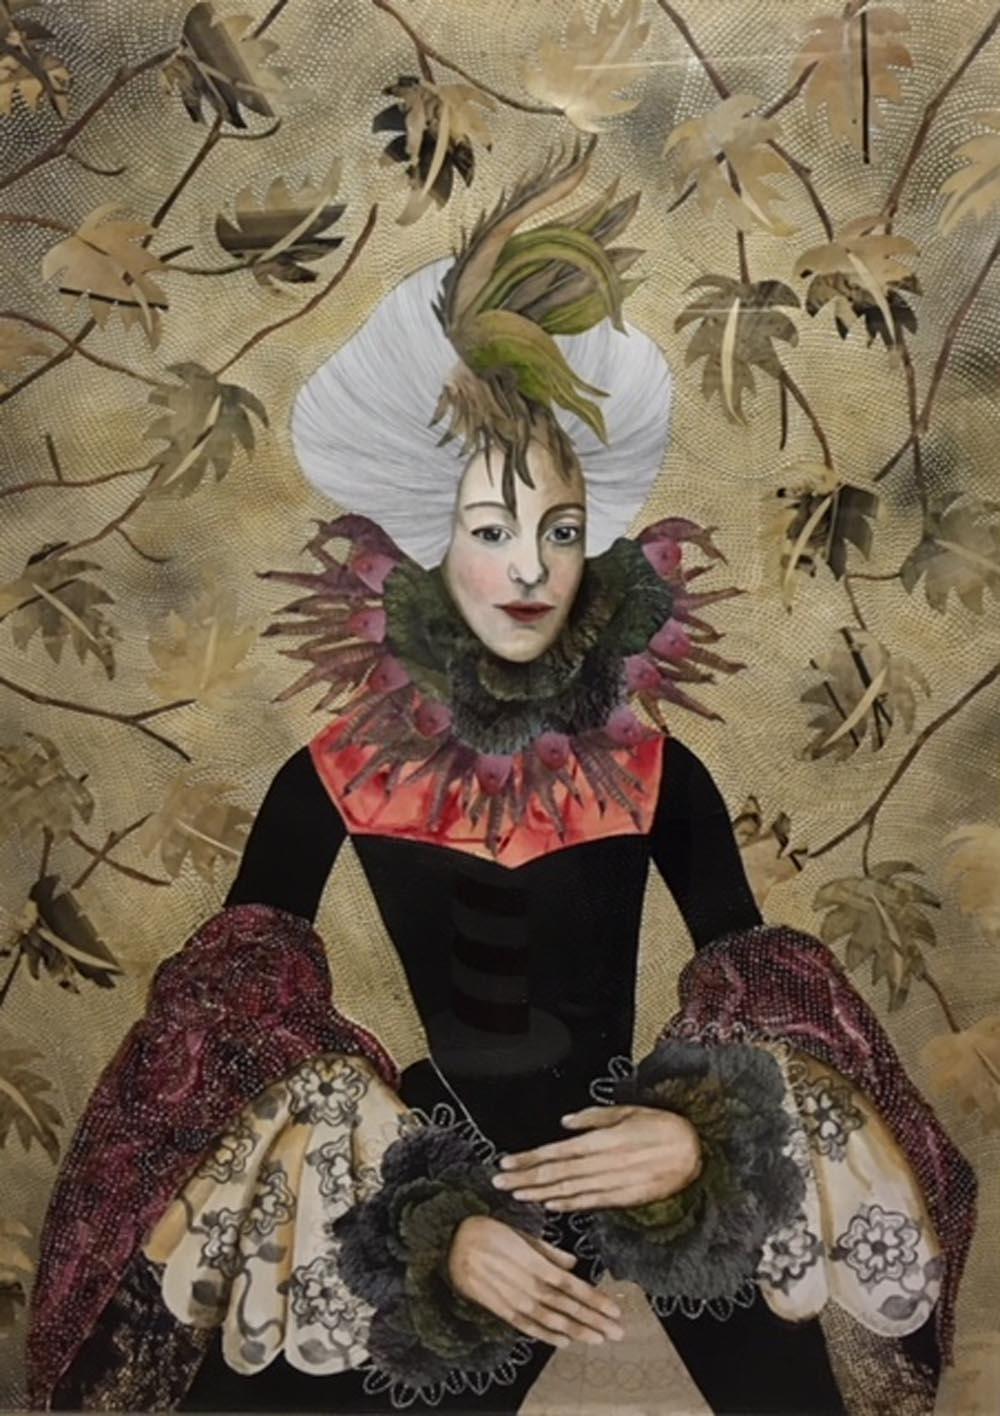 Sabina Pieper Figurative Print - Lady Bantum, a large Victorian lady print with elaborate finishes